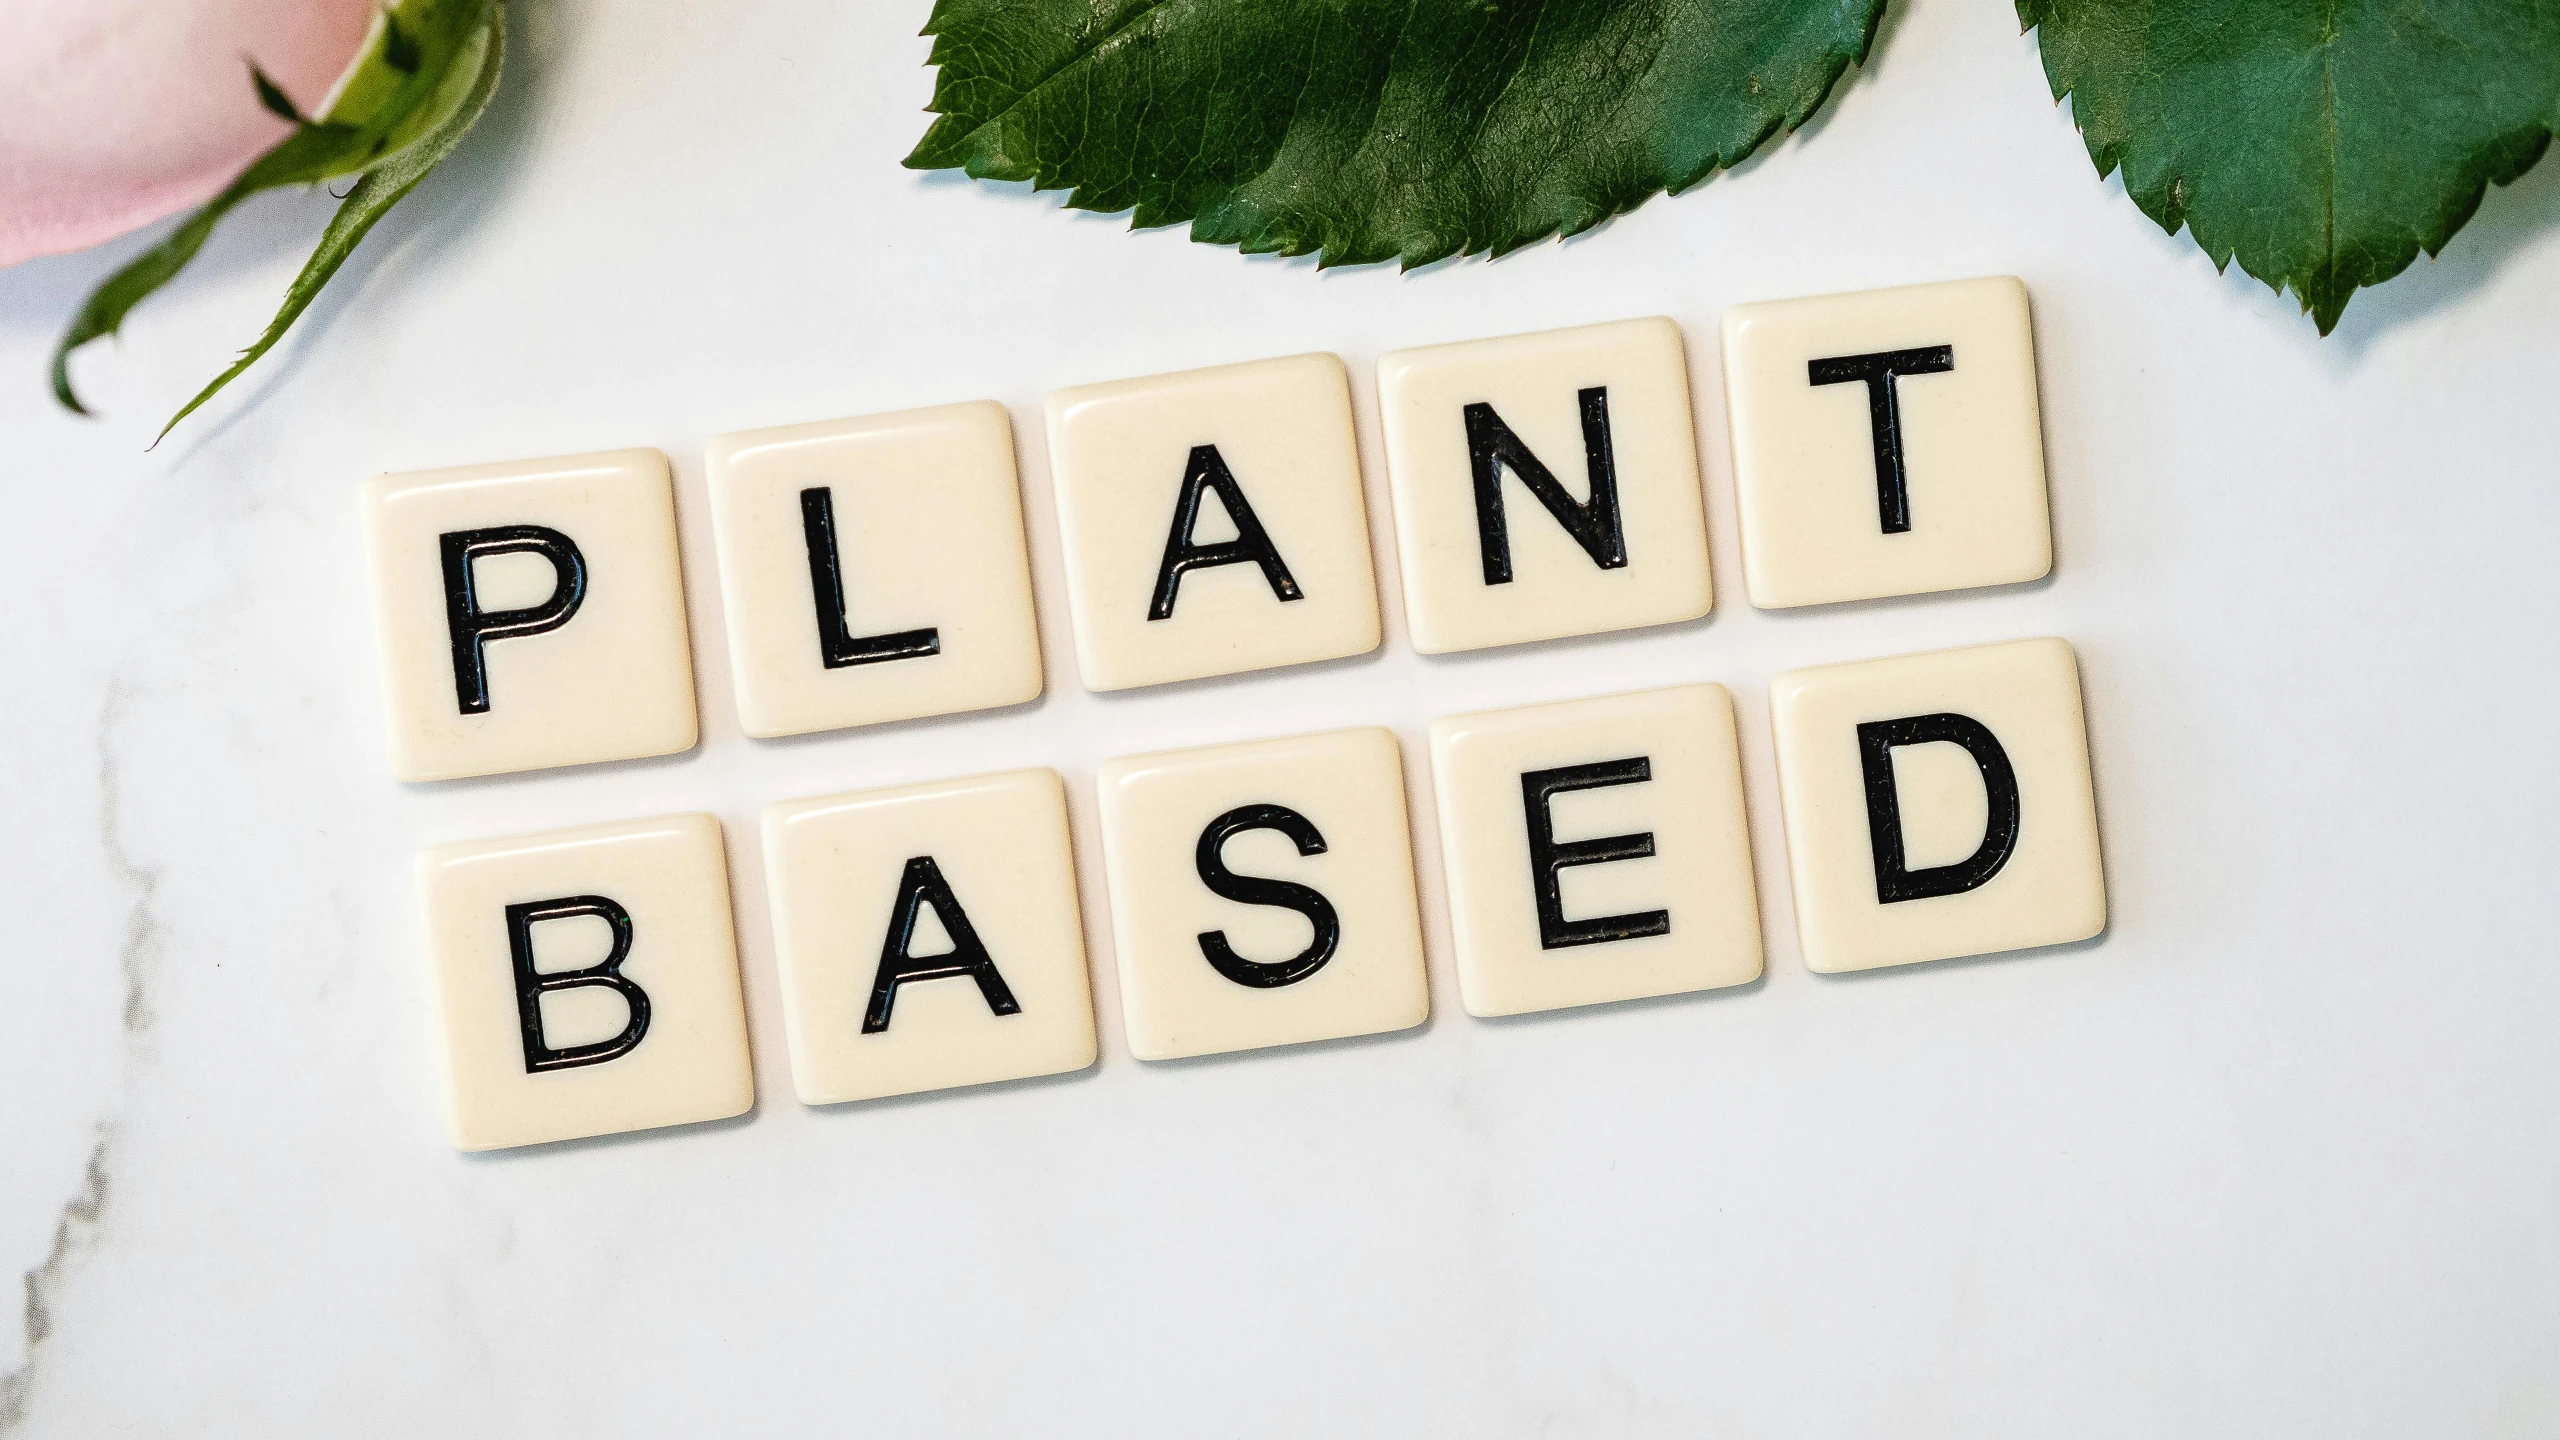 the word plant based spelled in scrabbles next to a rose, inspired by John Platt, trending on unsplash, cats and plants, tree and plants, industrial plant environment, ¯_(ツ)_/¯